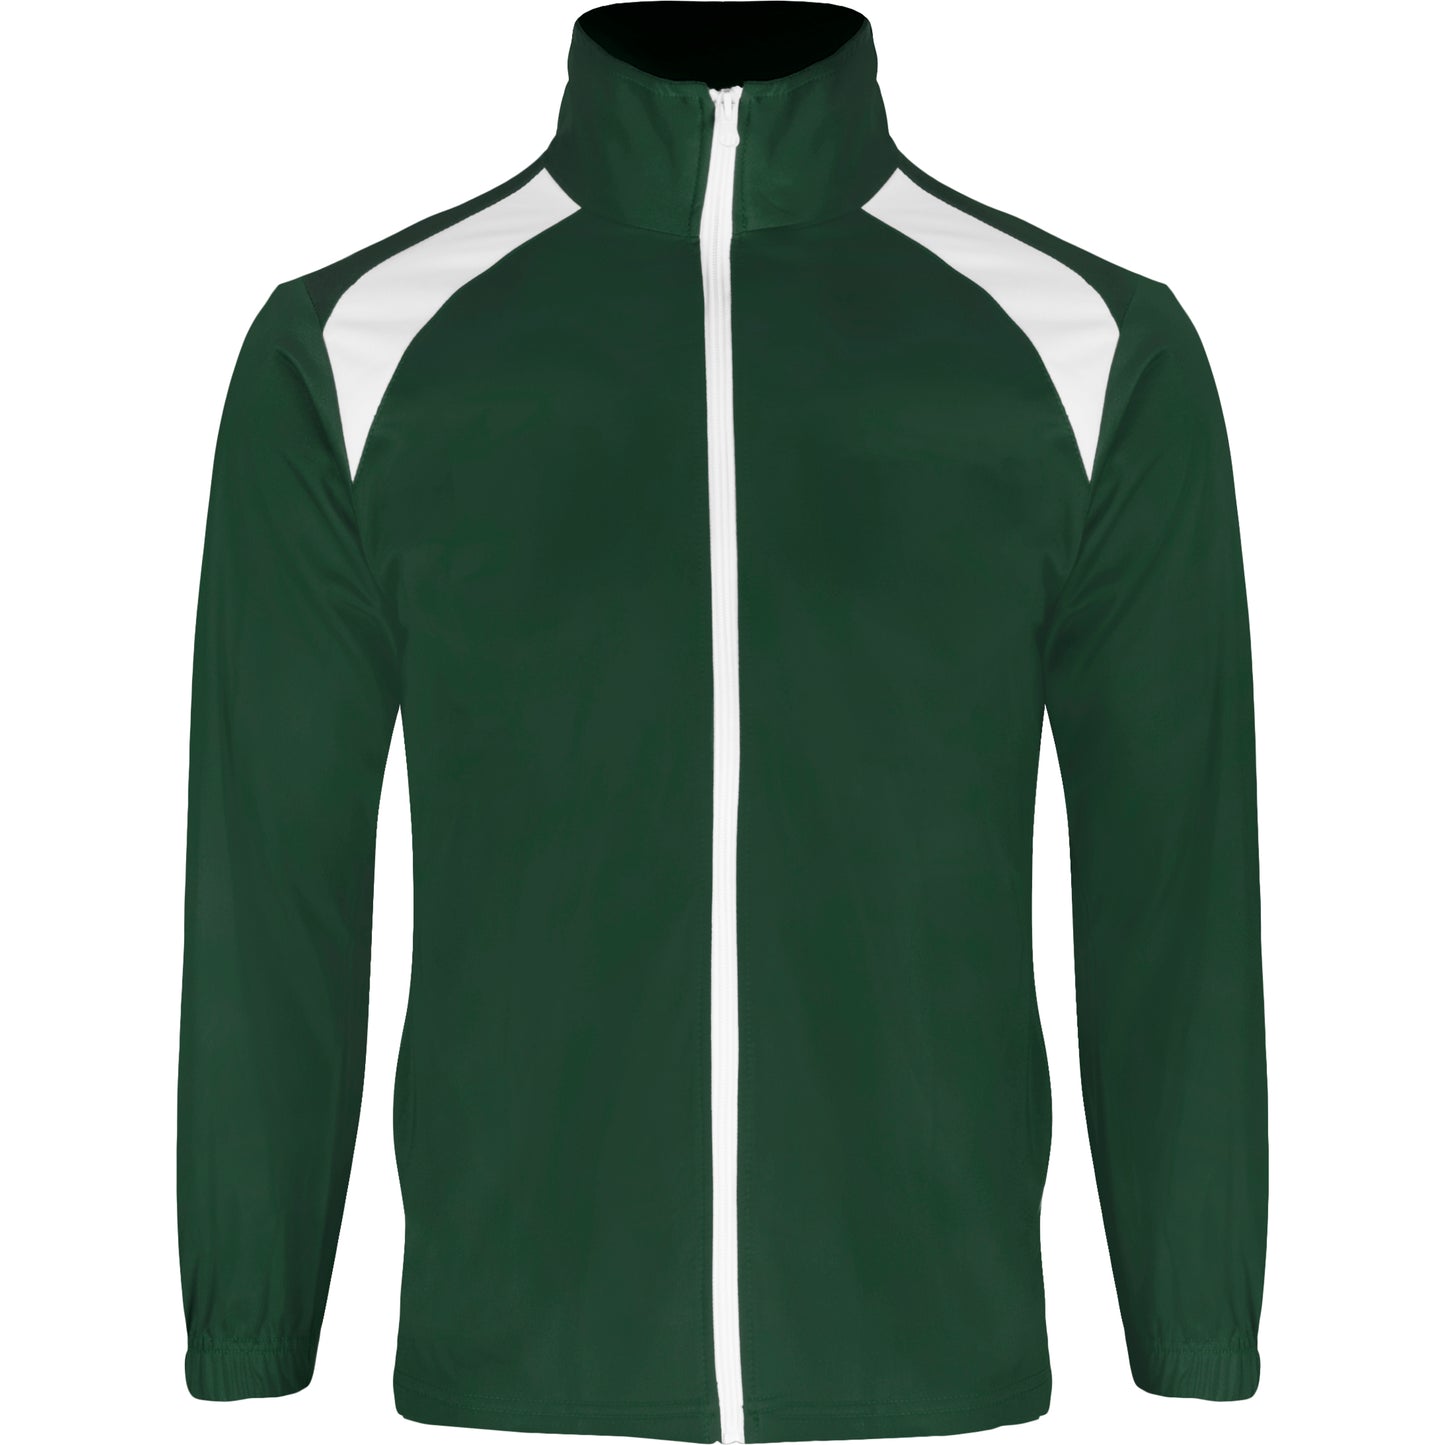 Unisex Arena Tracksuit - Green Only